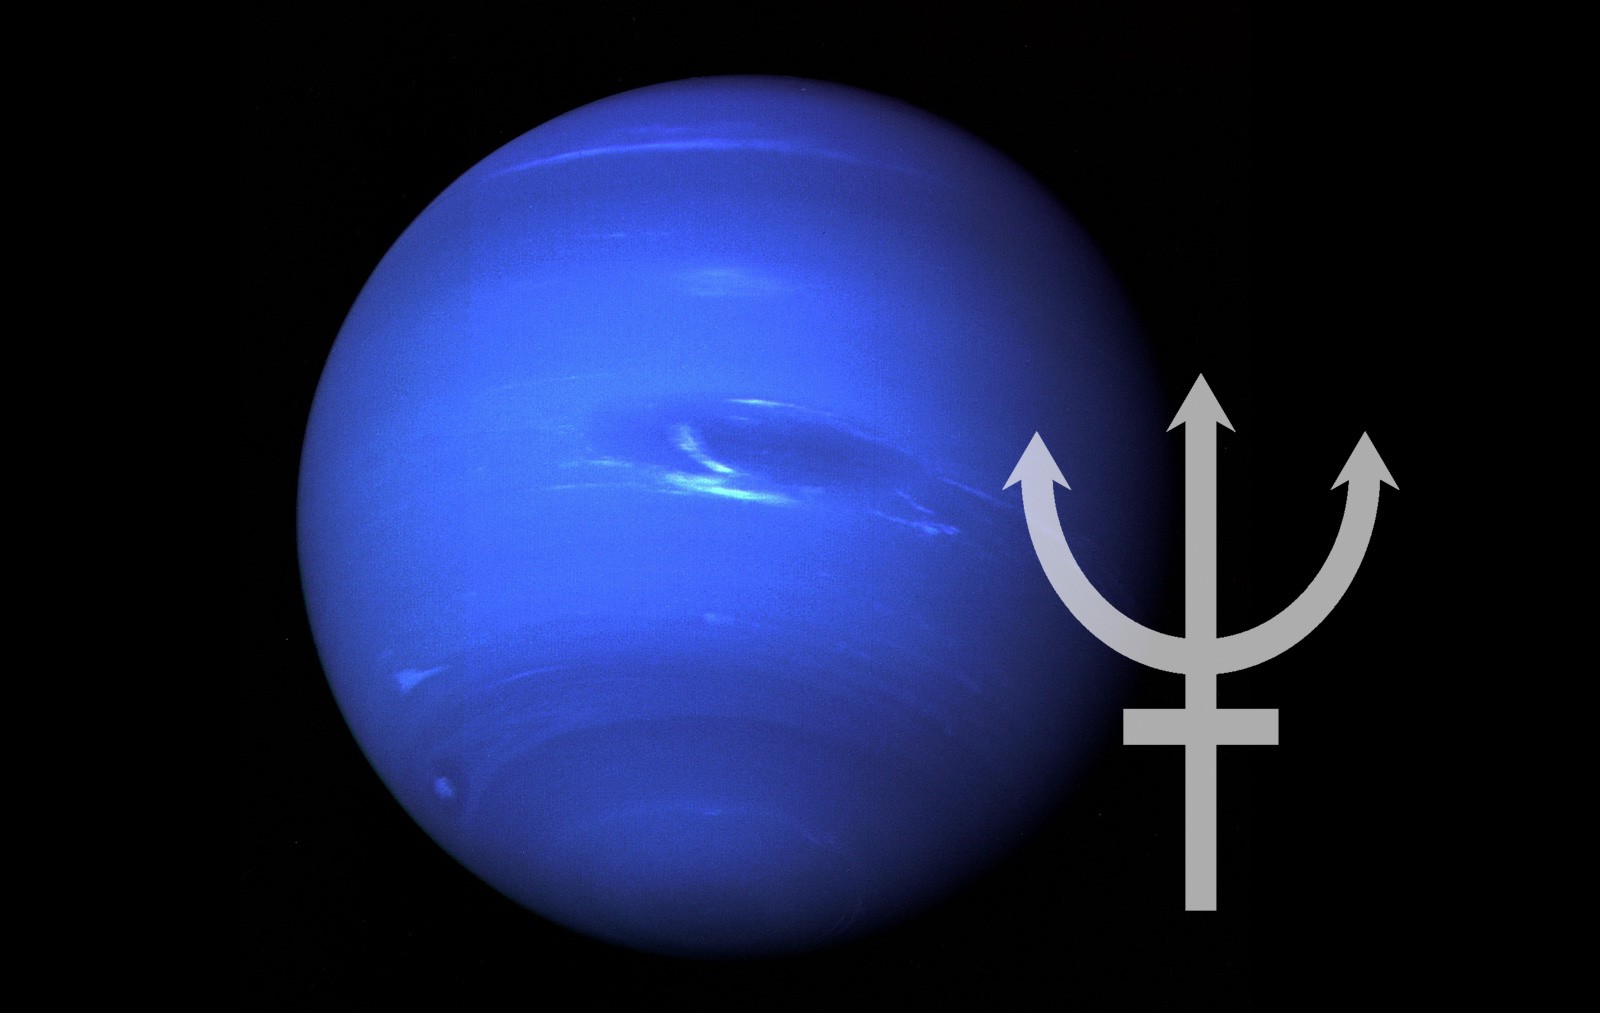 What does Neptune symbolize?